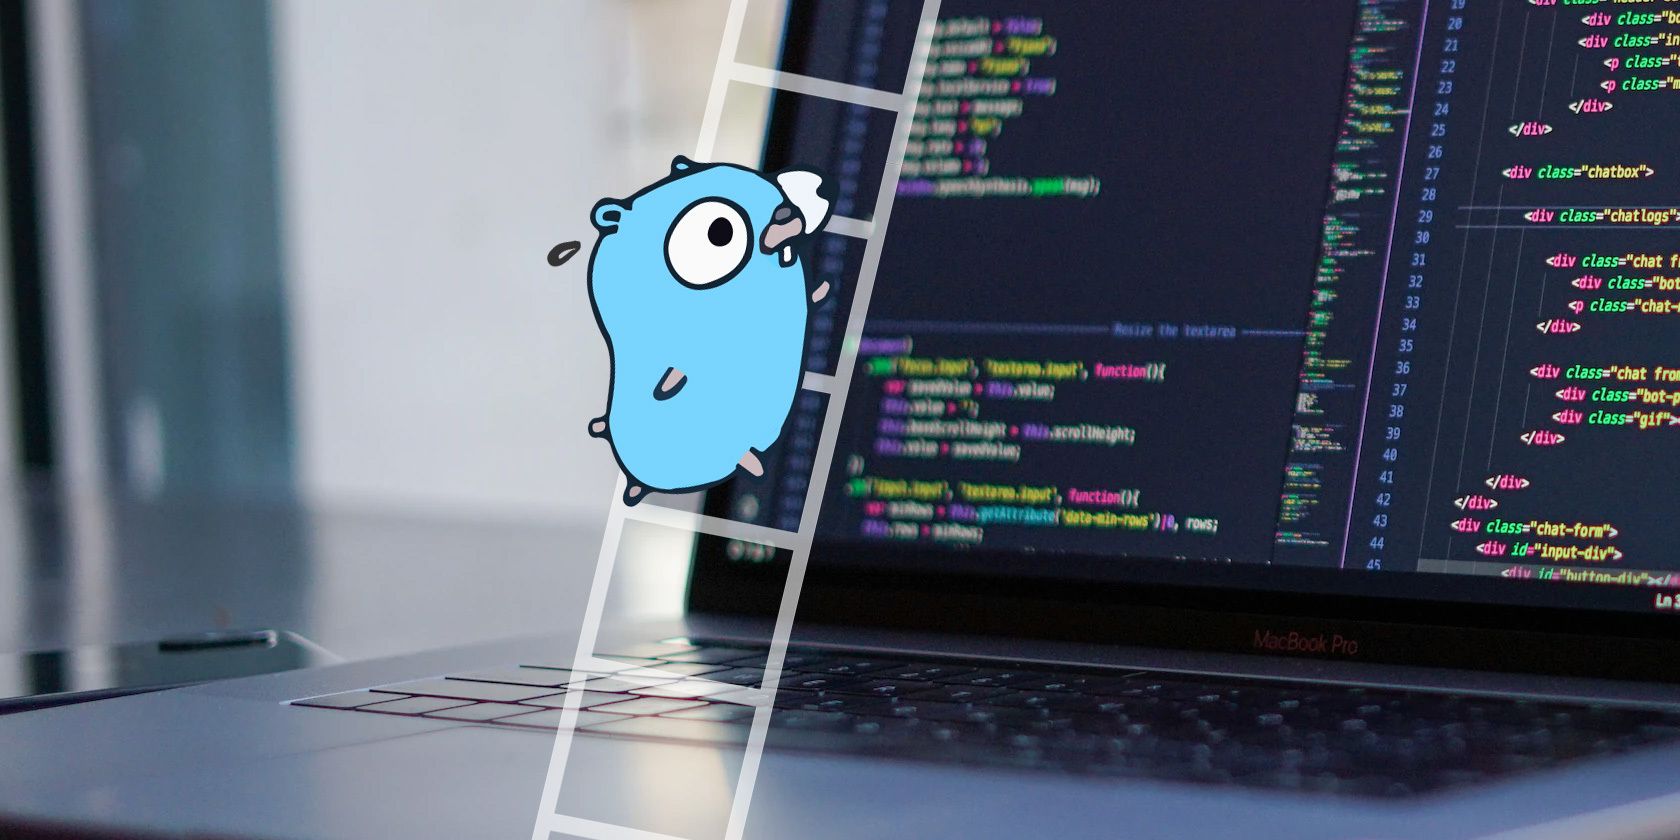 The Golang mascot, a blue gopher, climbing a ladder superimposed on a photograph of a laptop.